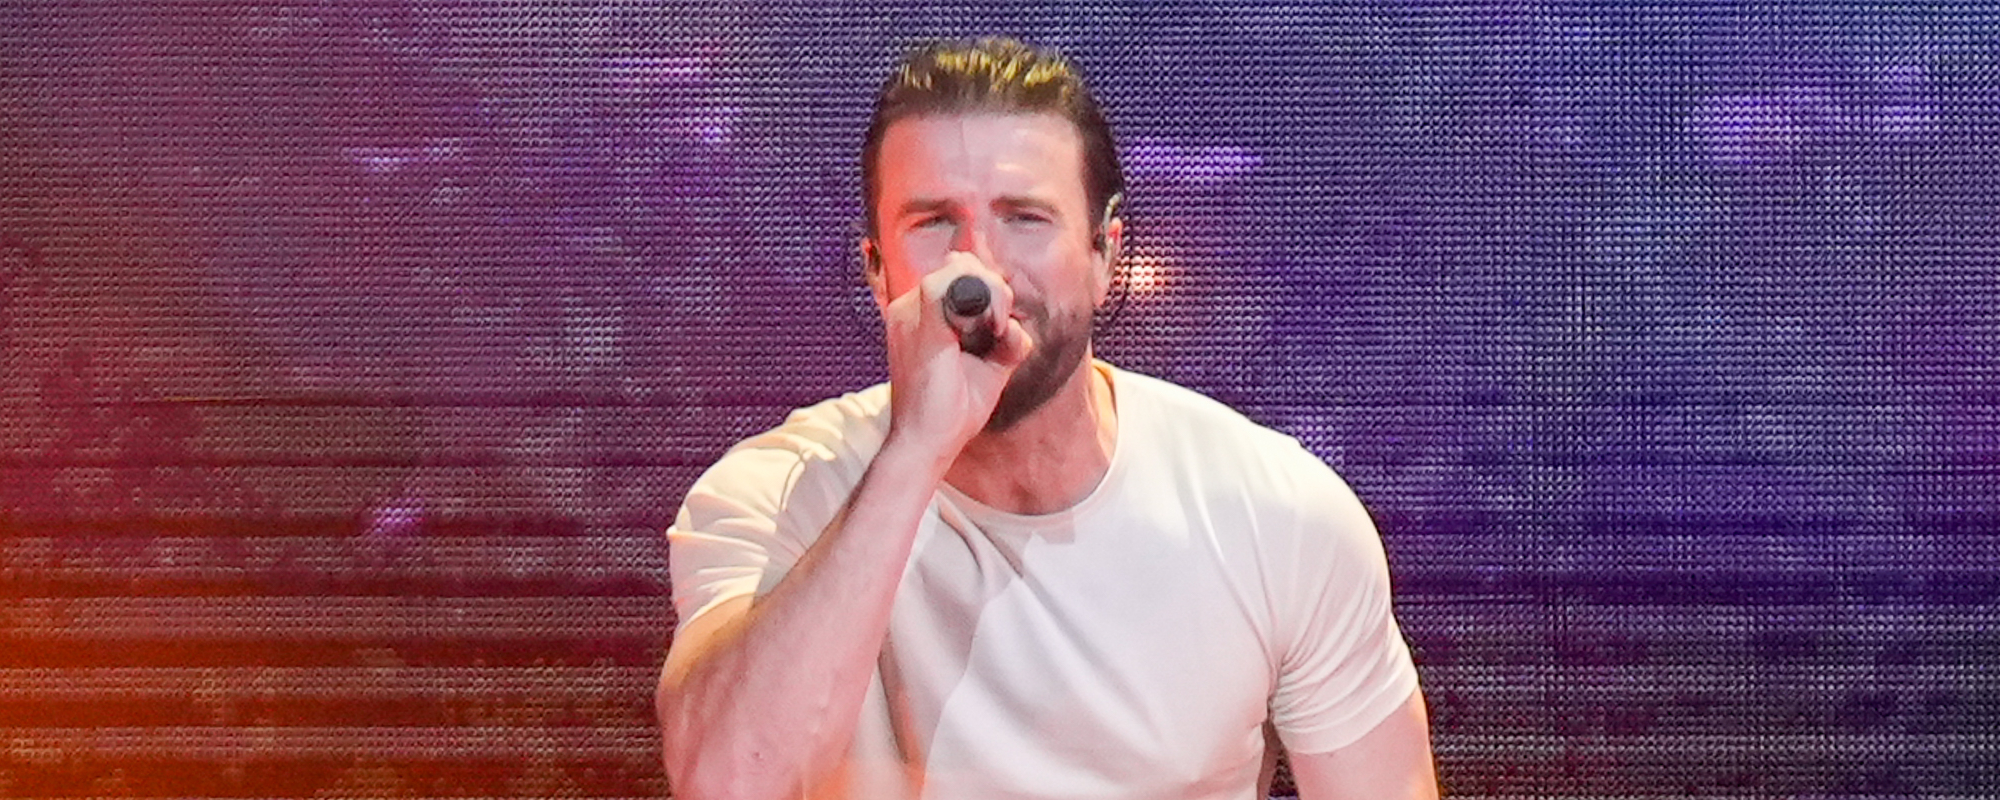 Sam Hunt and His Wife Honor Johnny Cash in New Music Video “Locked Up”